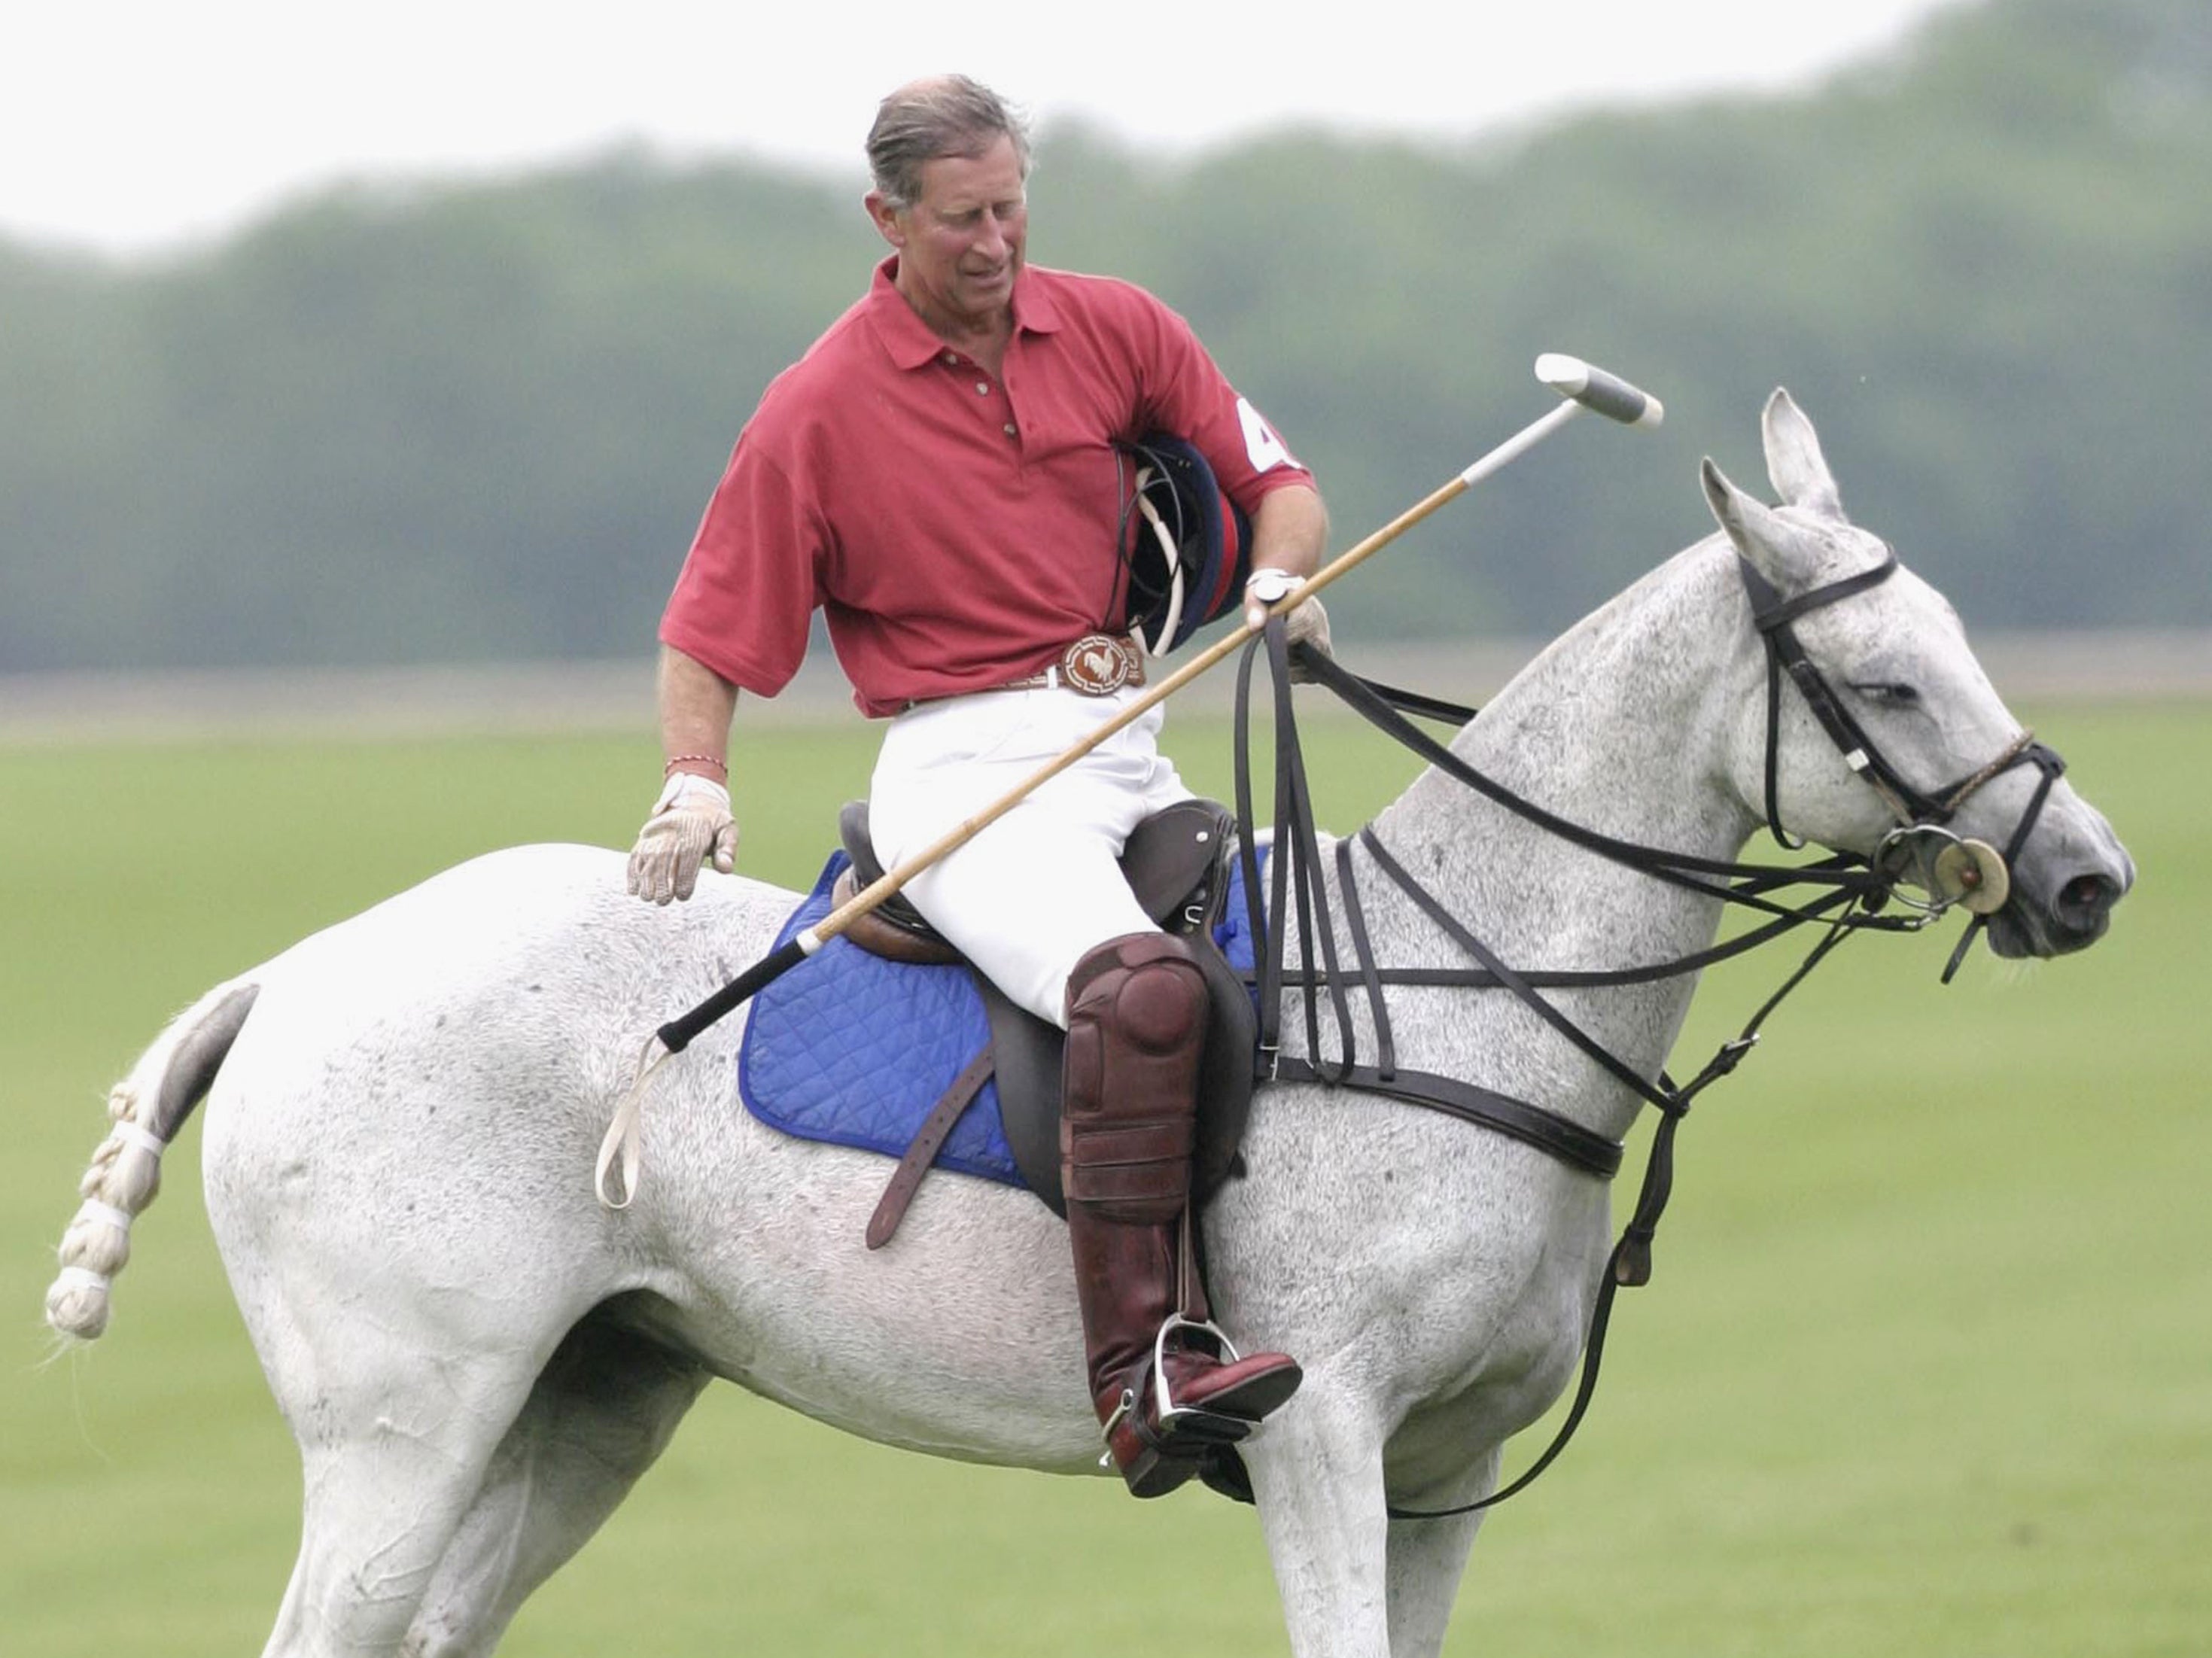 Charles exercises to help with chronic pain from playing polo